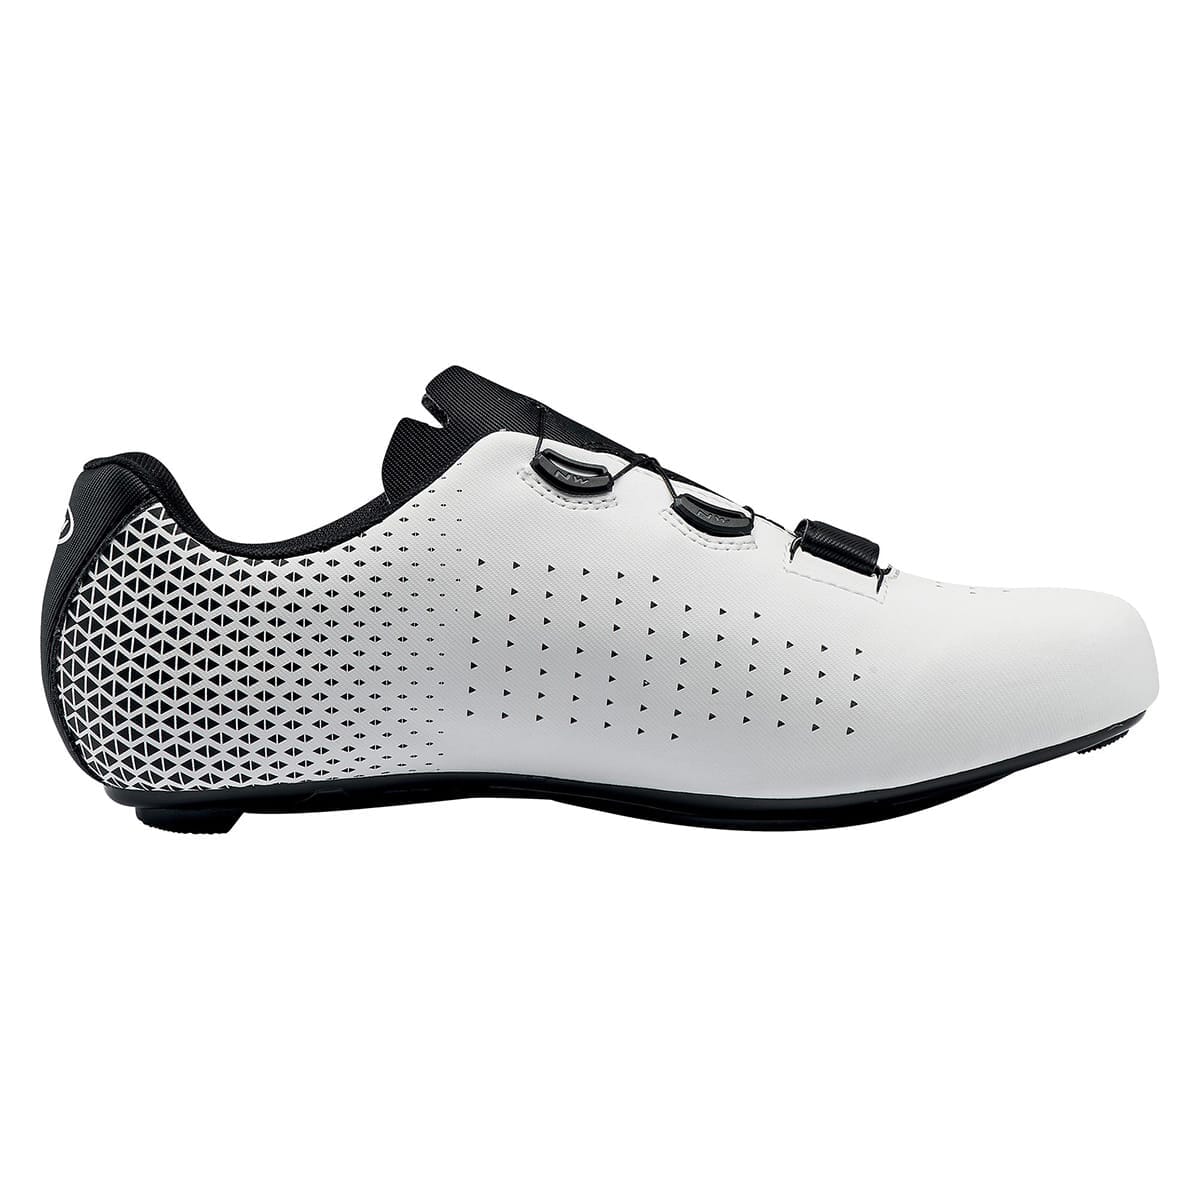 Chaussures Route NORTHWAVE CORE PLUS Blanc